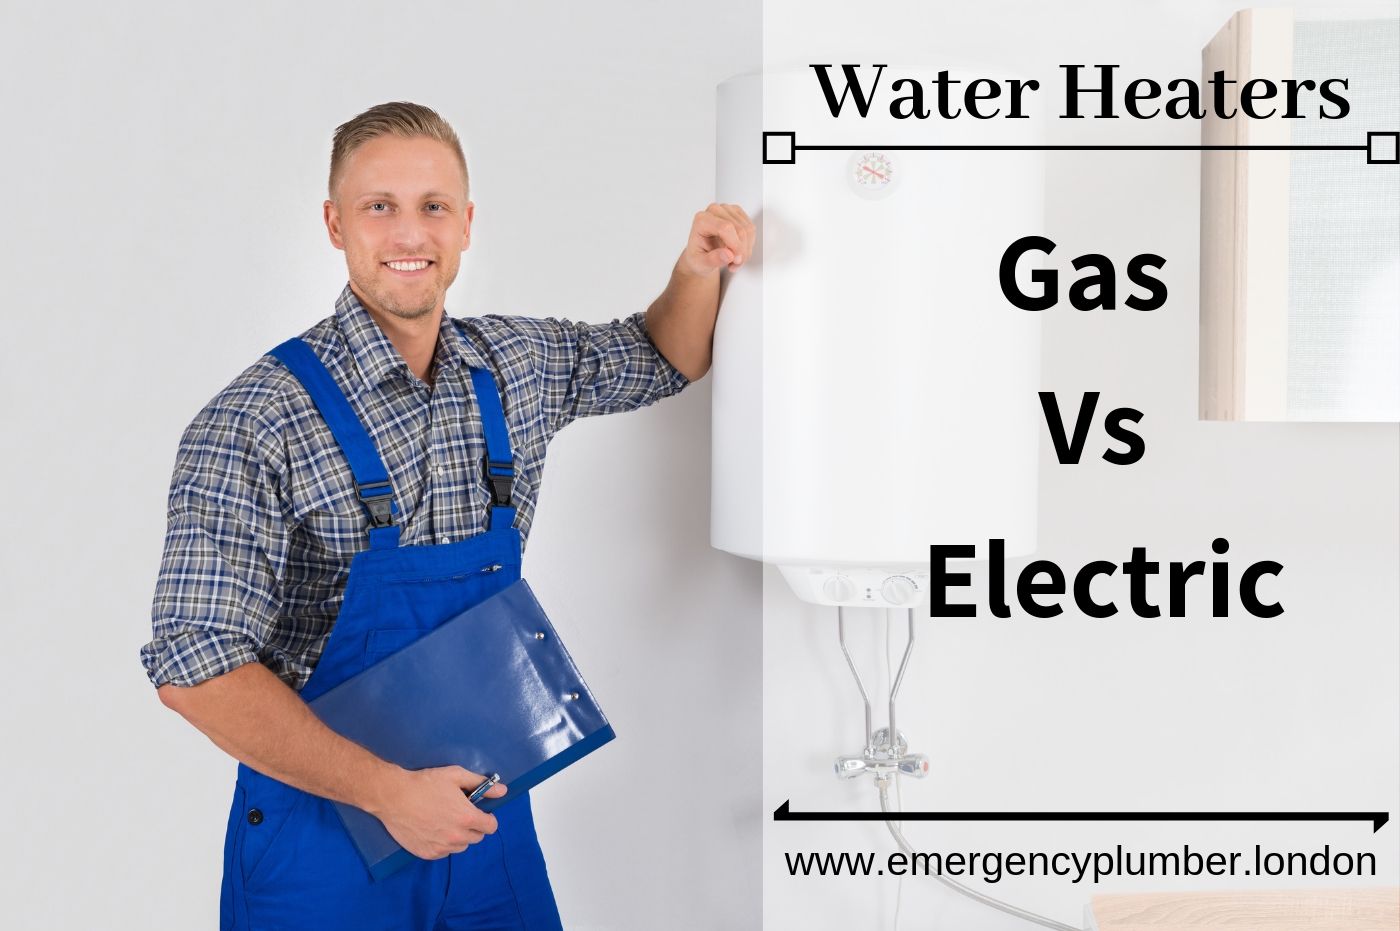 Gas vs Electric Water Heater - Pros and Cons - How to Choose?